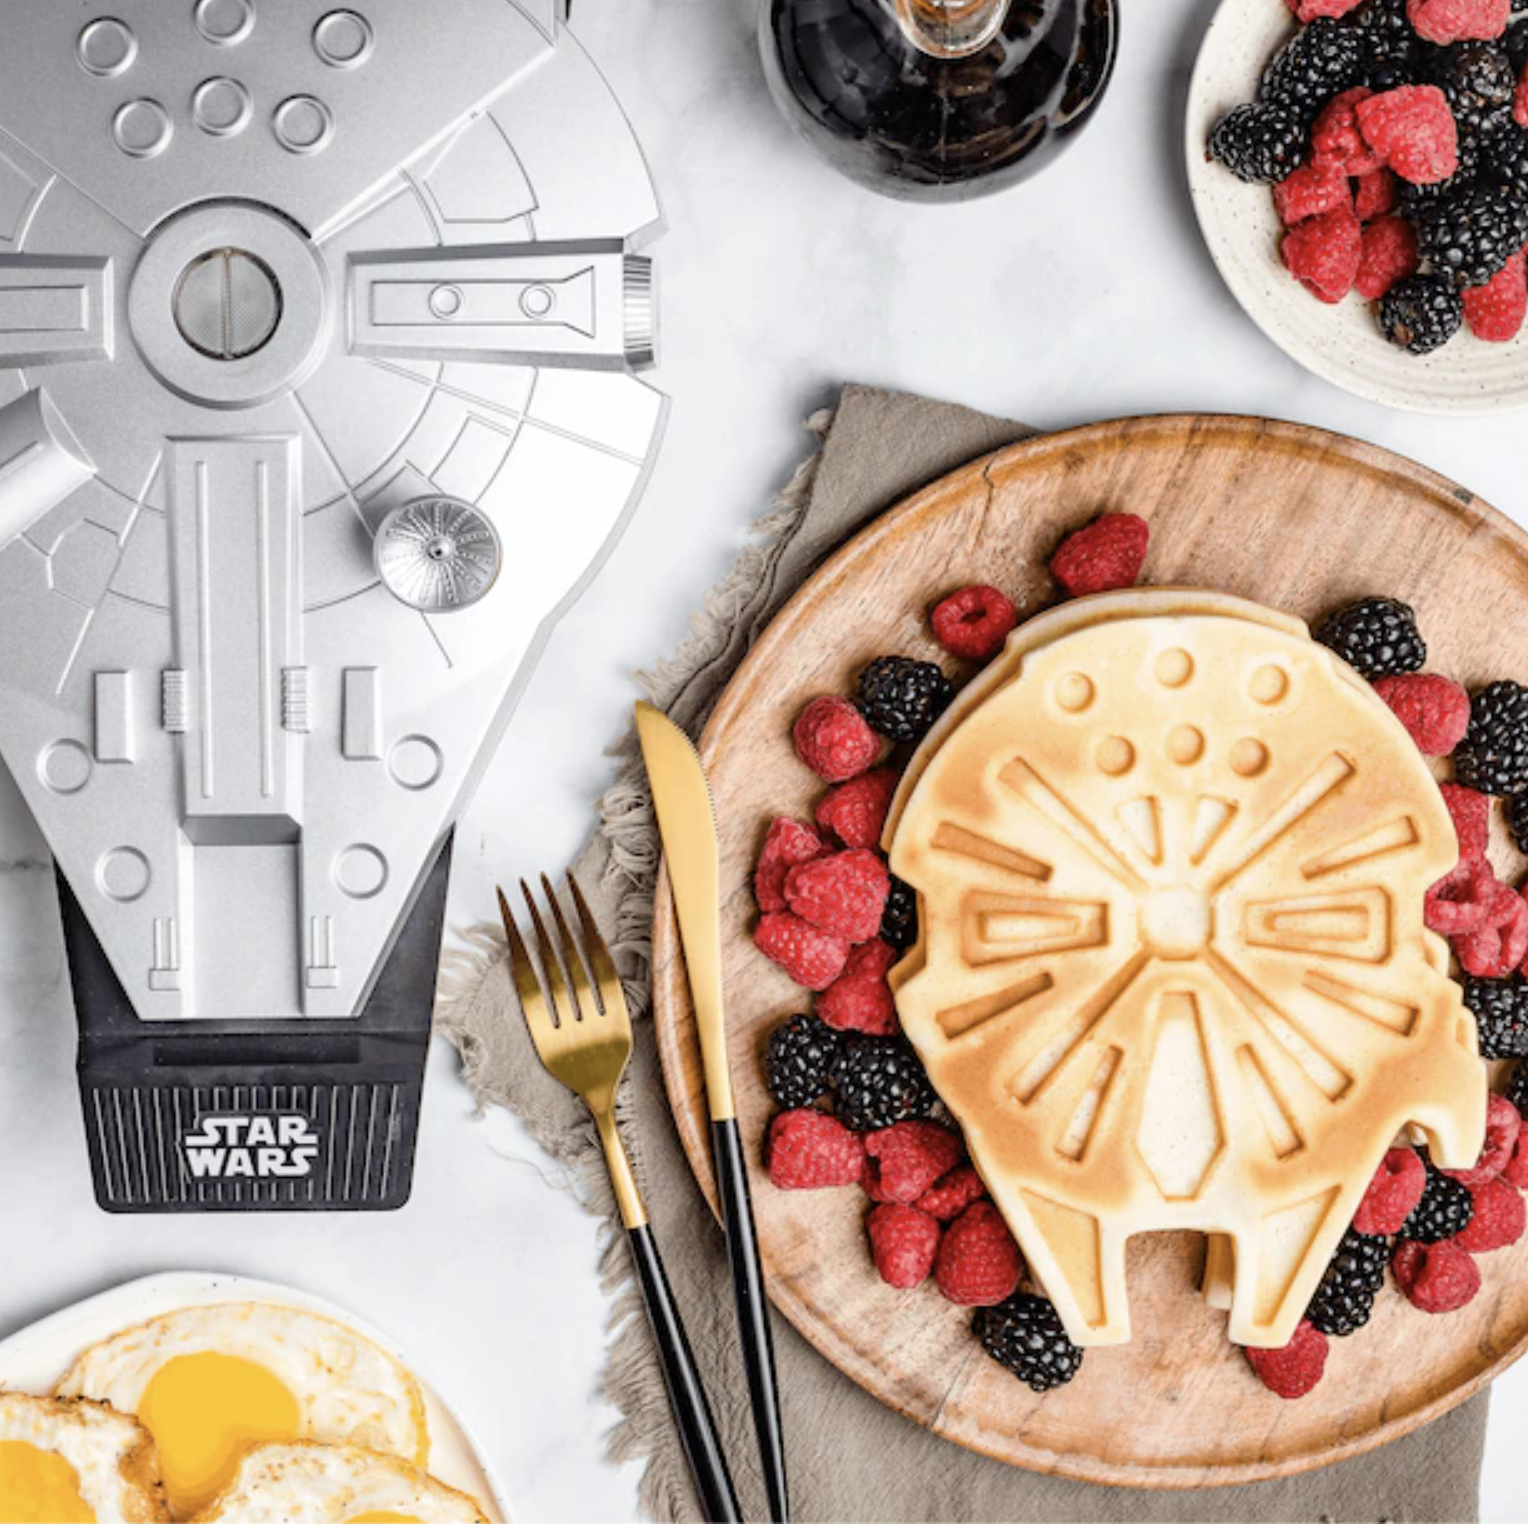 The waffle maker next to a finished waffle surrounded by berries